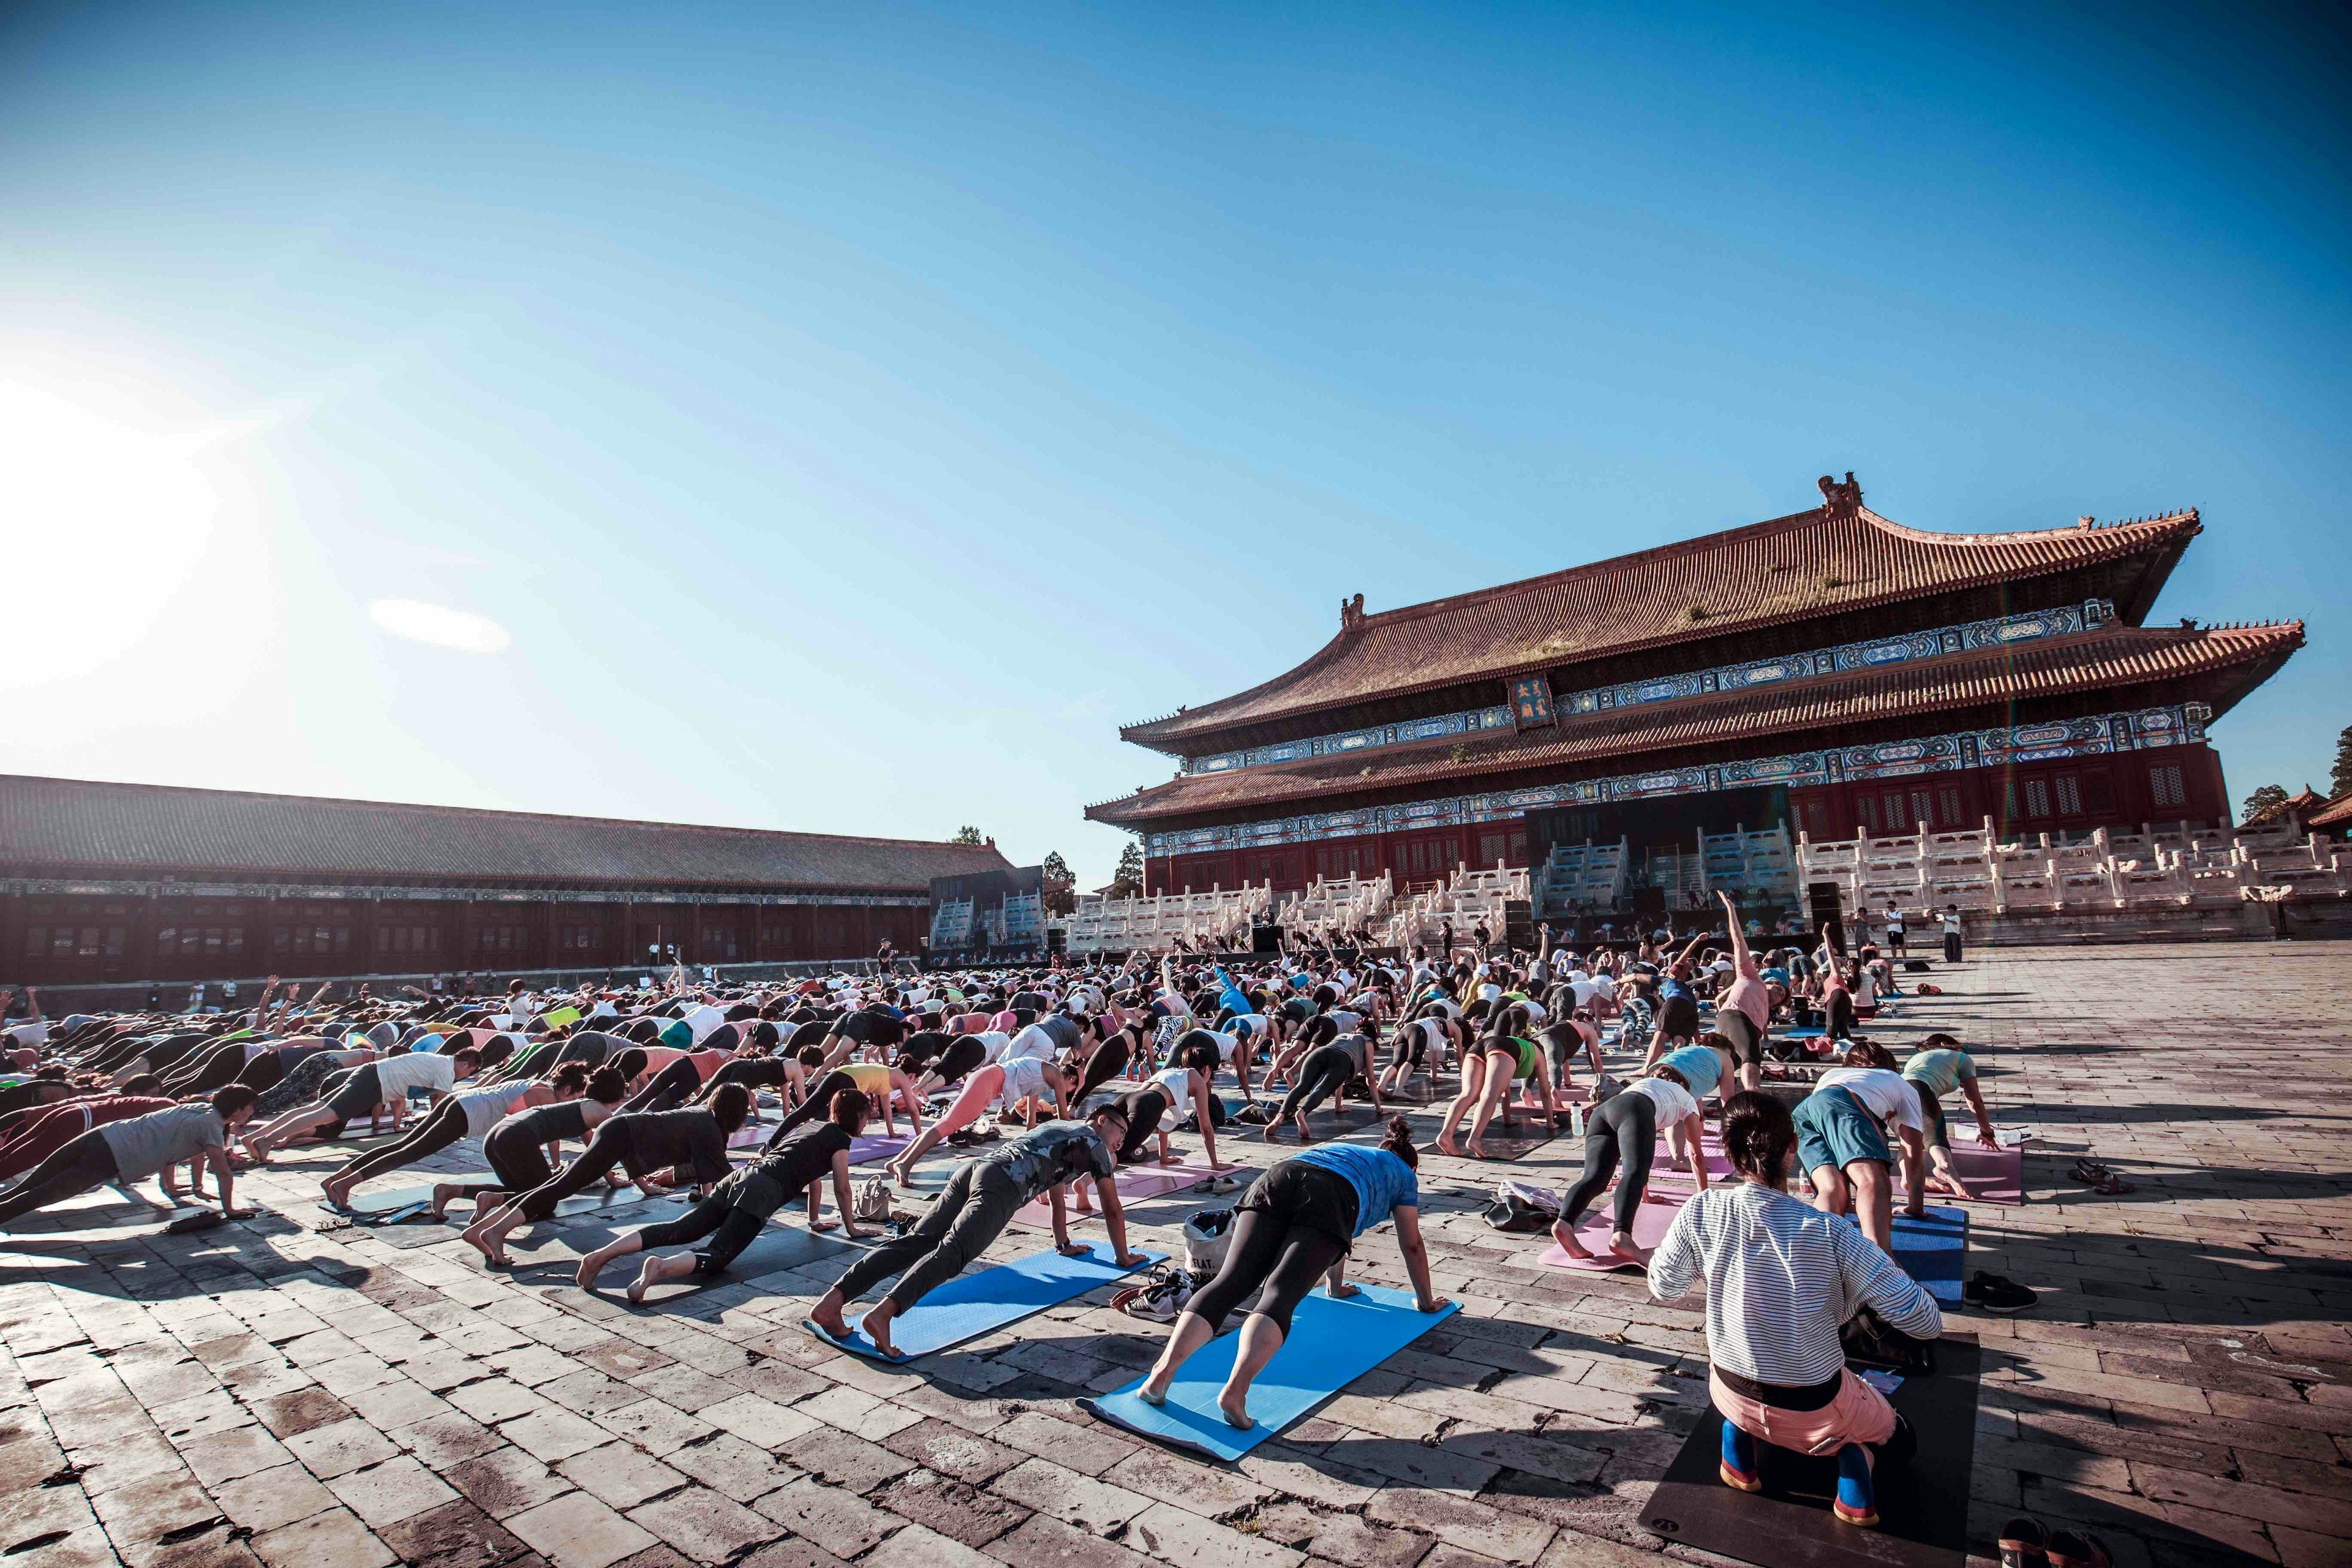 Hundreds of people gathered at the Forbidden City for Lululemon's Unroll China 2016 event on August 28. (Courtesy Photo)